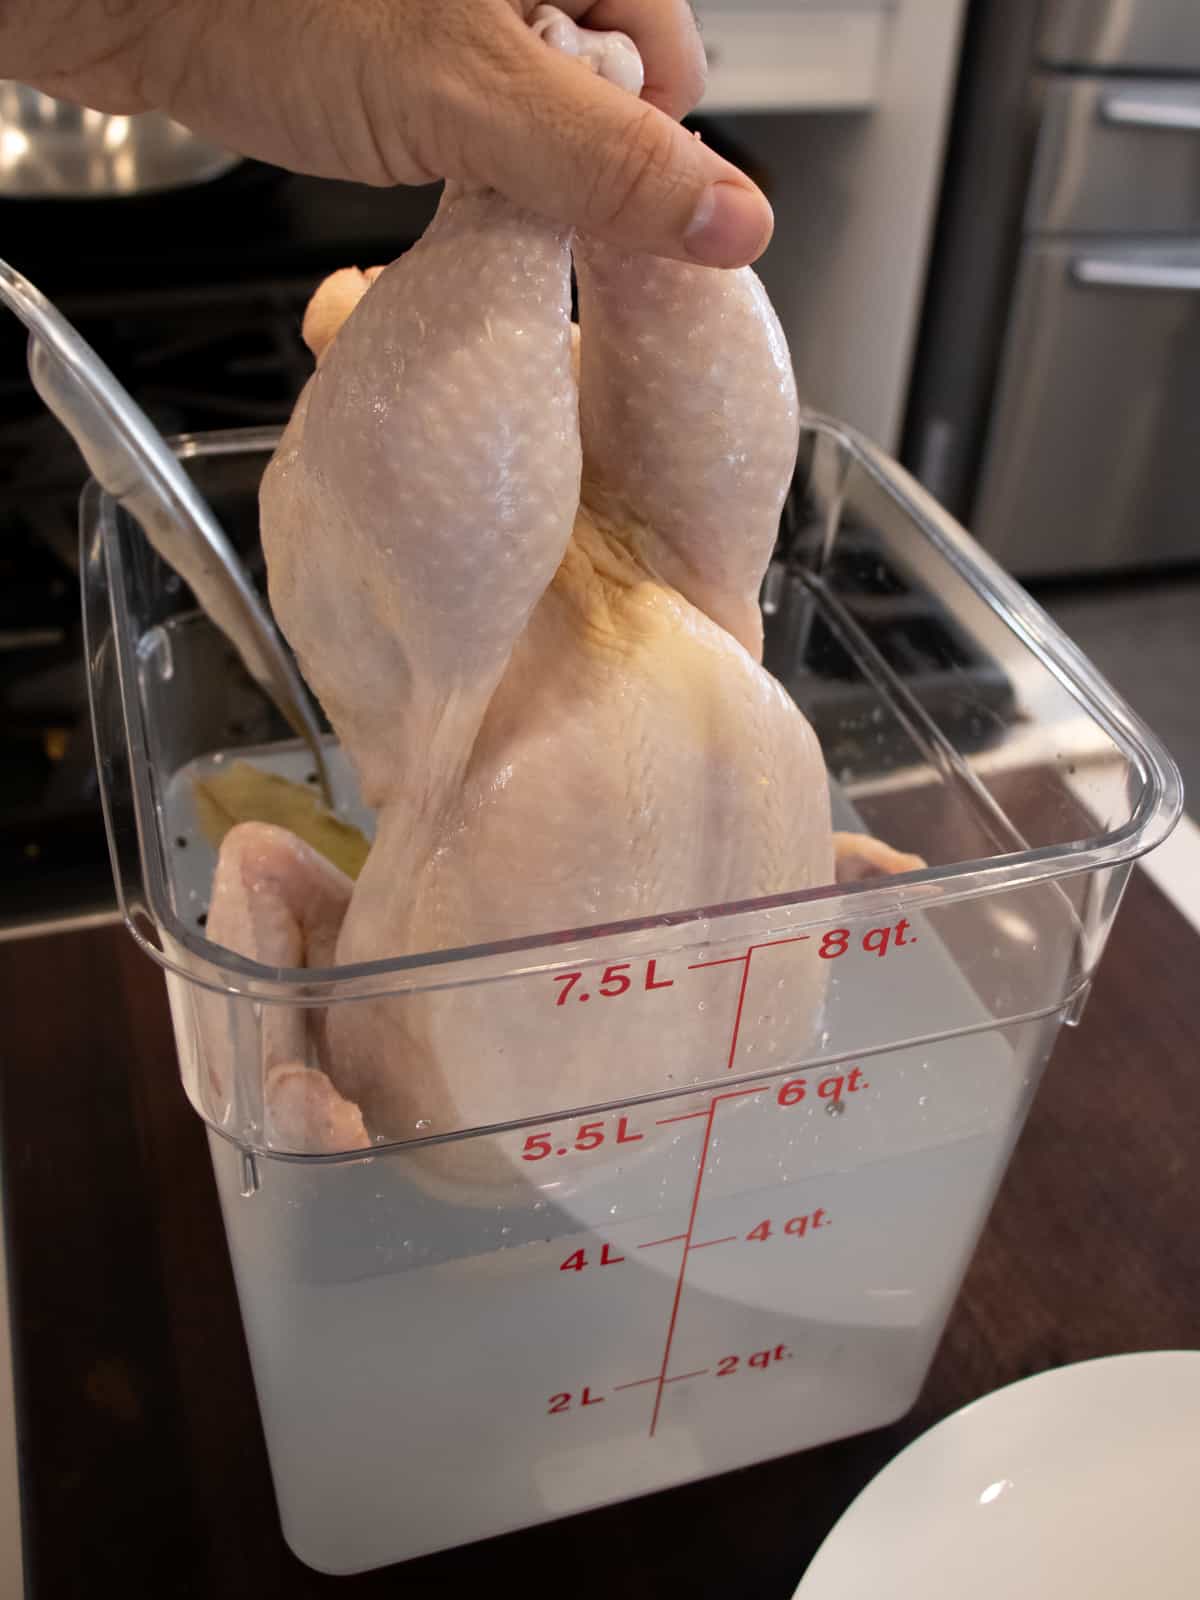 Lowering a whole chicken by its legs into a container of brine.